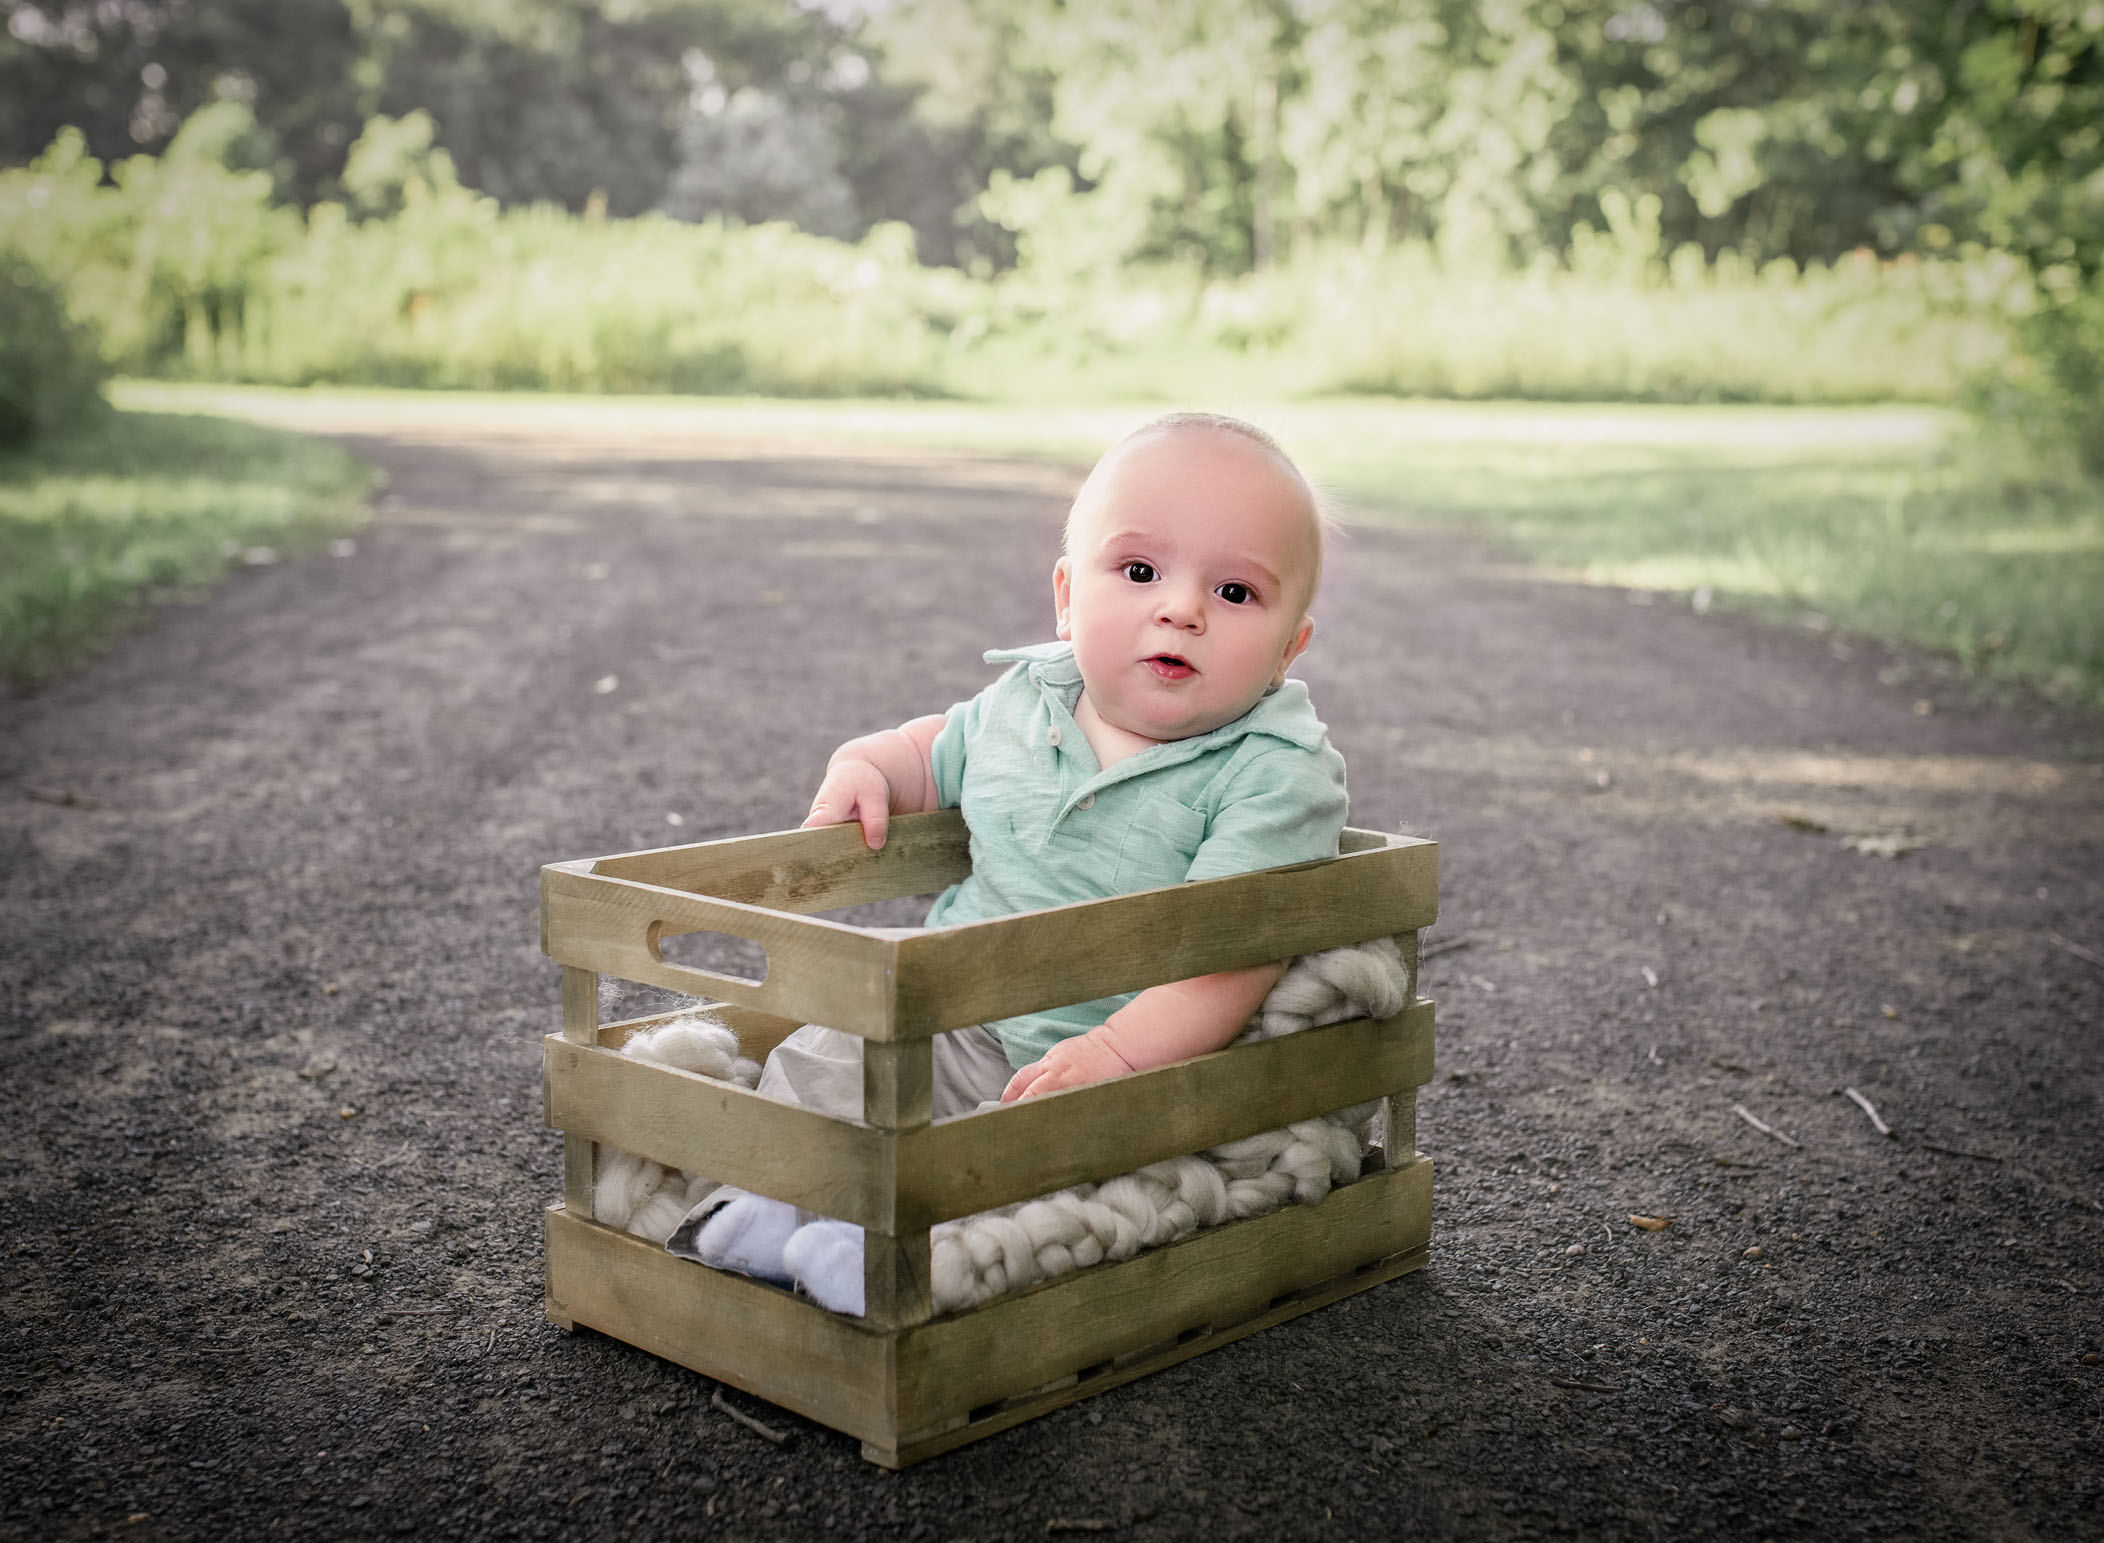 6 month old baby boy sitting in a crate on a path in the garden